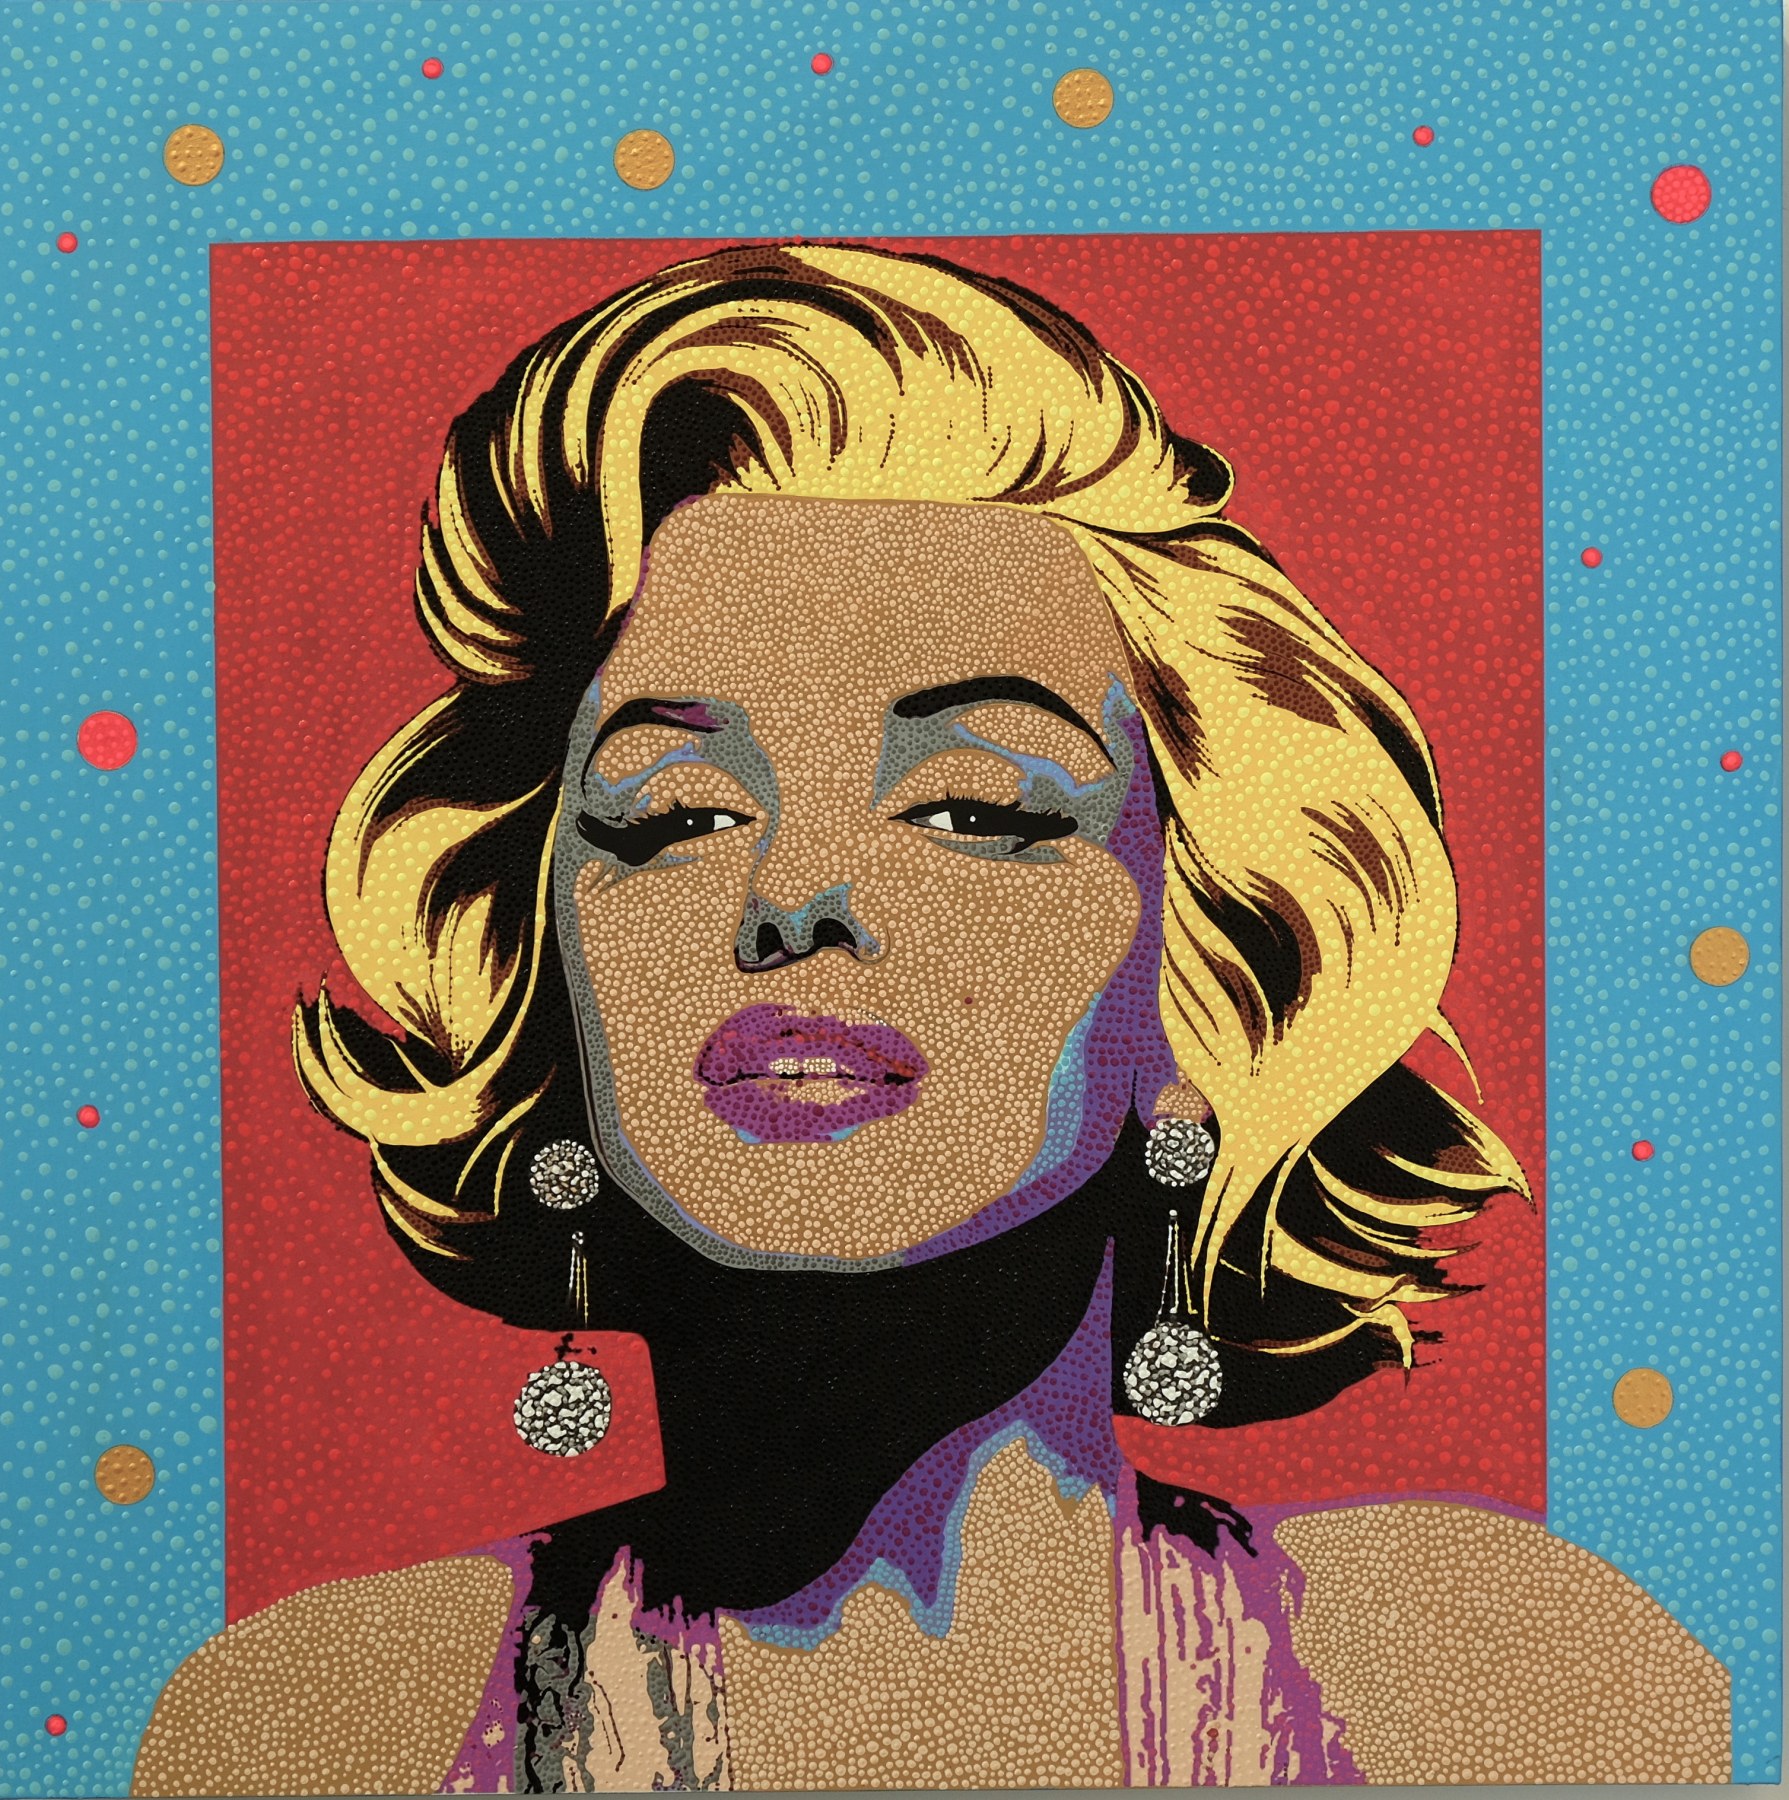 Marilyn Monroe from Dot Pop by Philip Tsiaras at Hg Contemporary founded by Philippe Hoerle Guggenheim